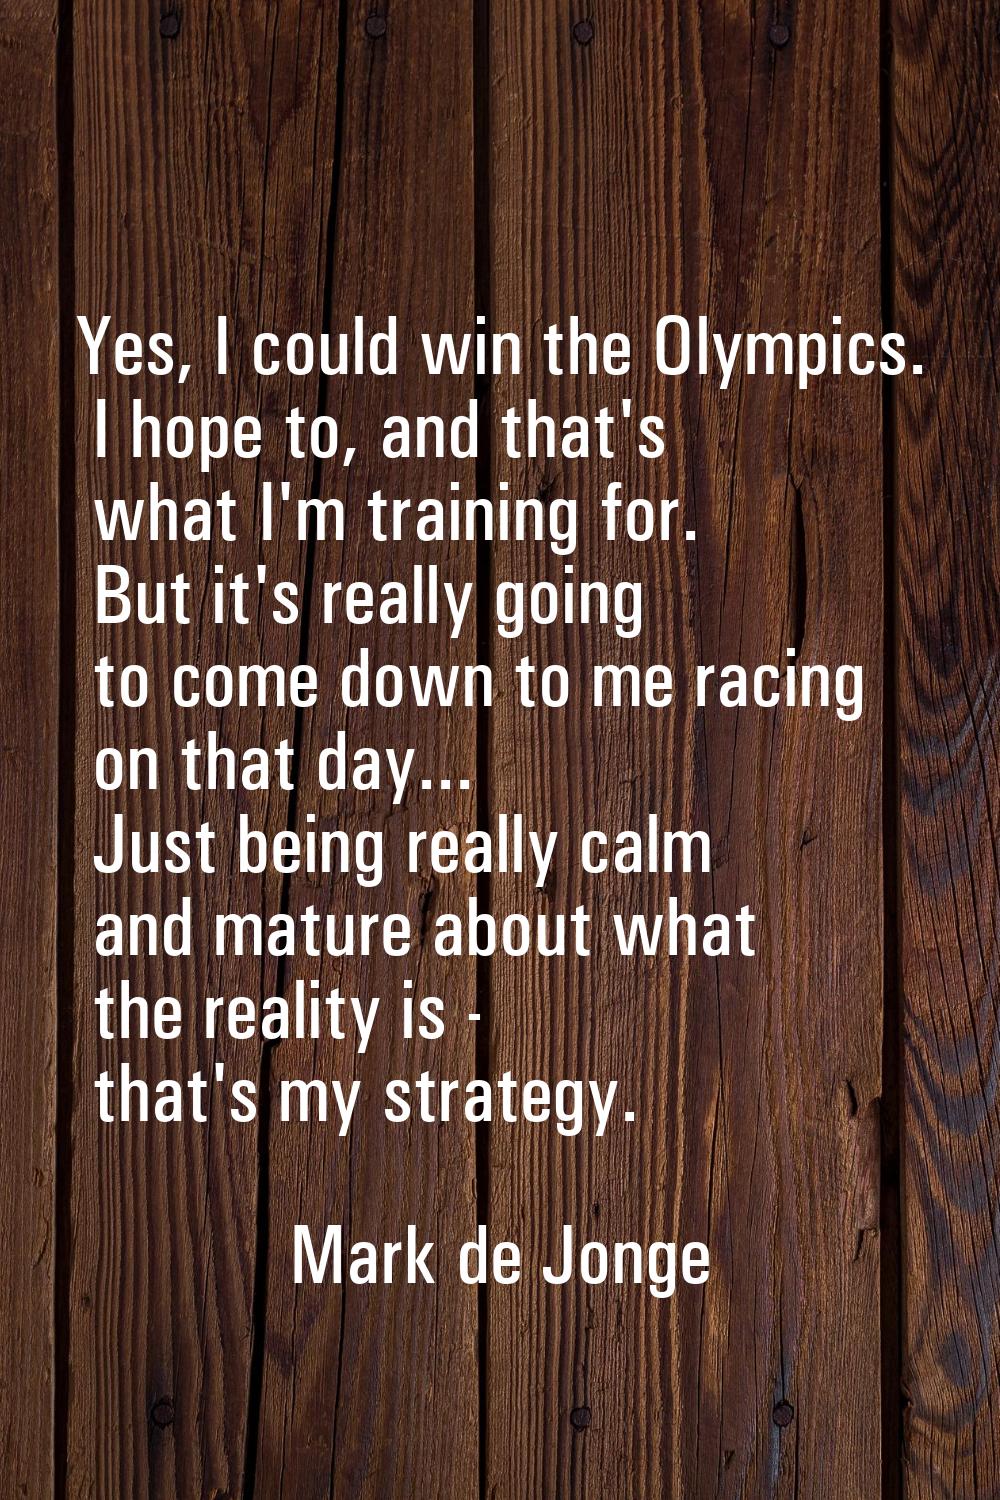 Yes, I could win the Olympics. I hope to, and that's what I'm training for. But it's really going t